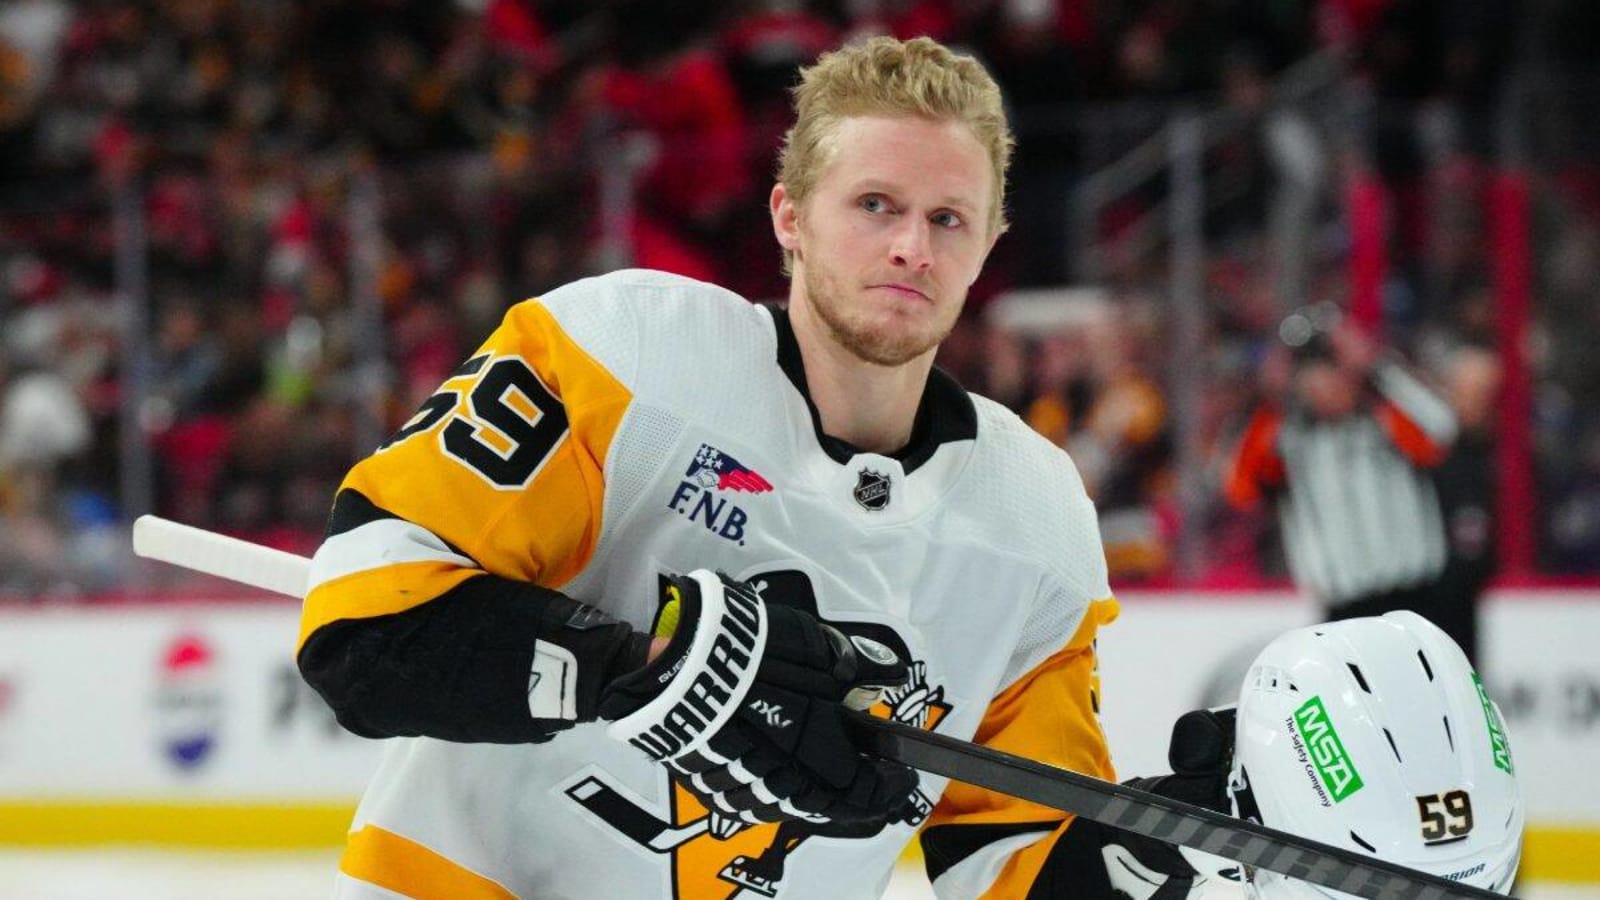 The waiting game continues for Jake Guentzel ahead of NHL Trade Deadline